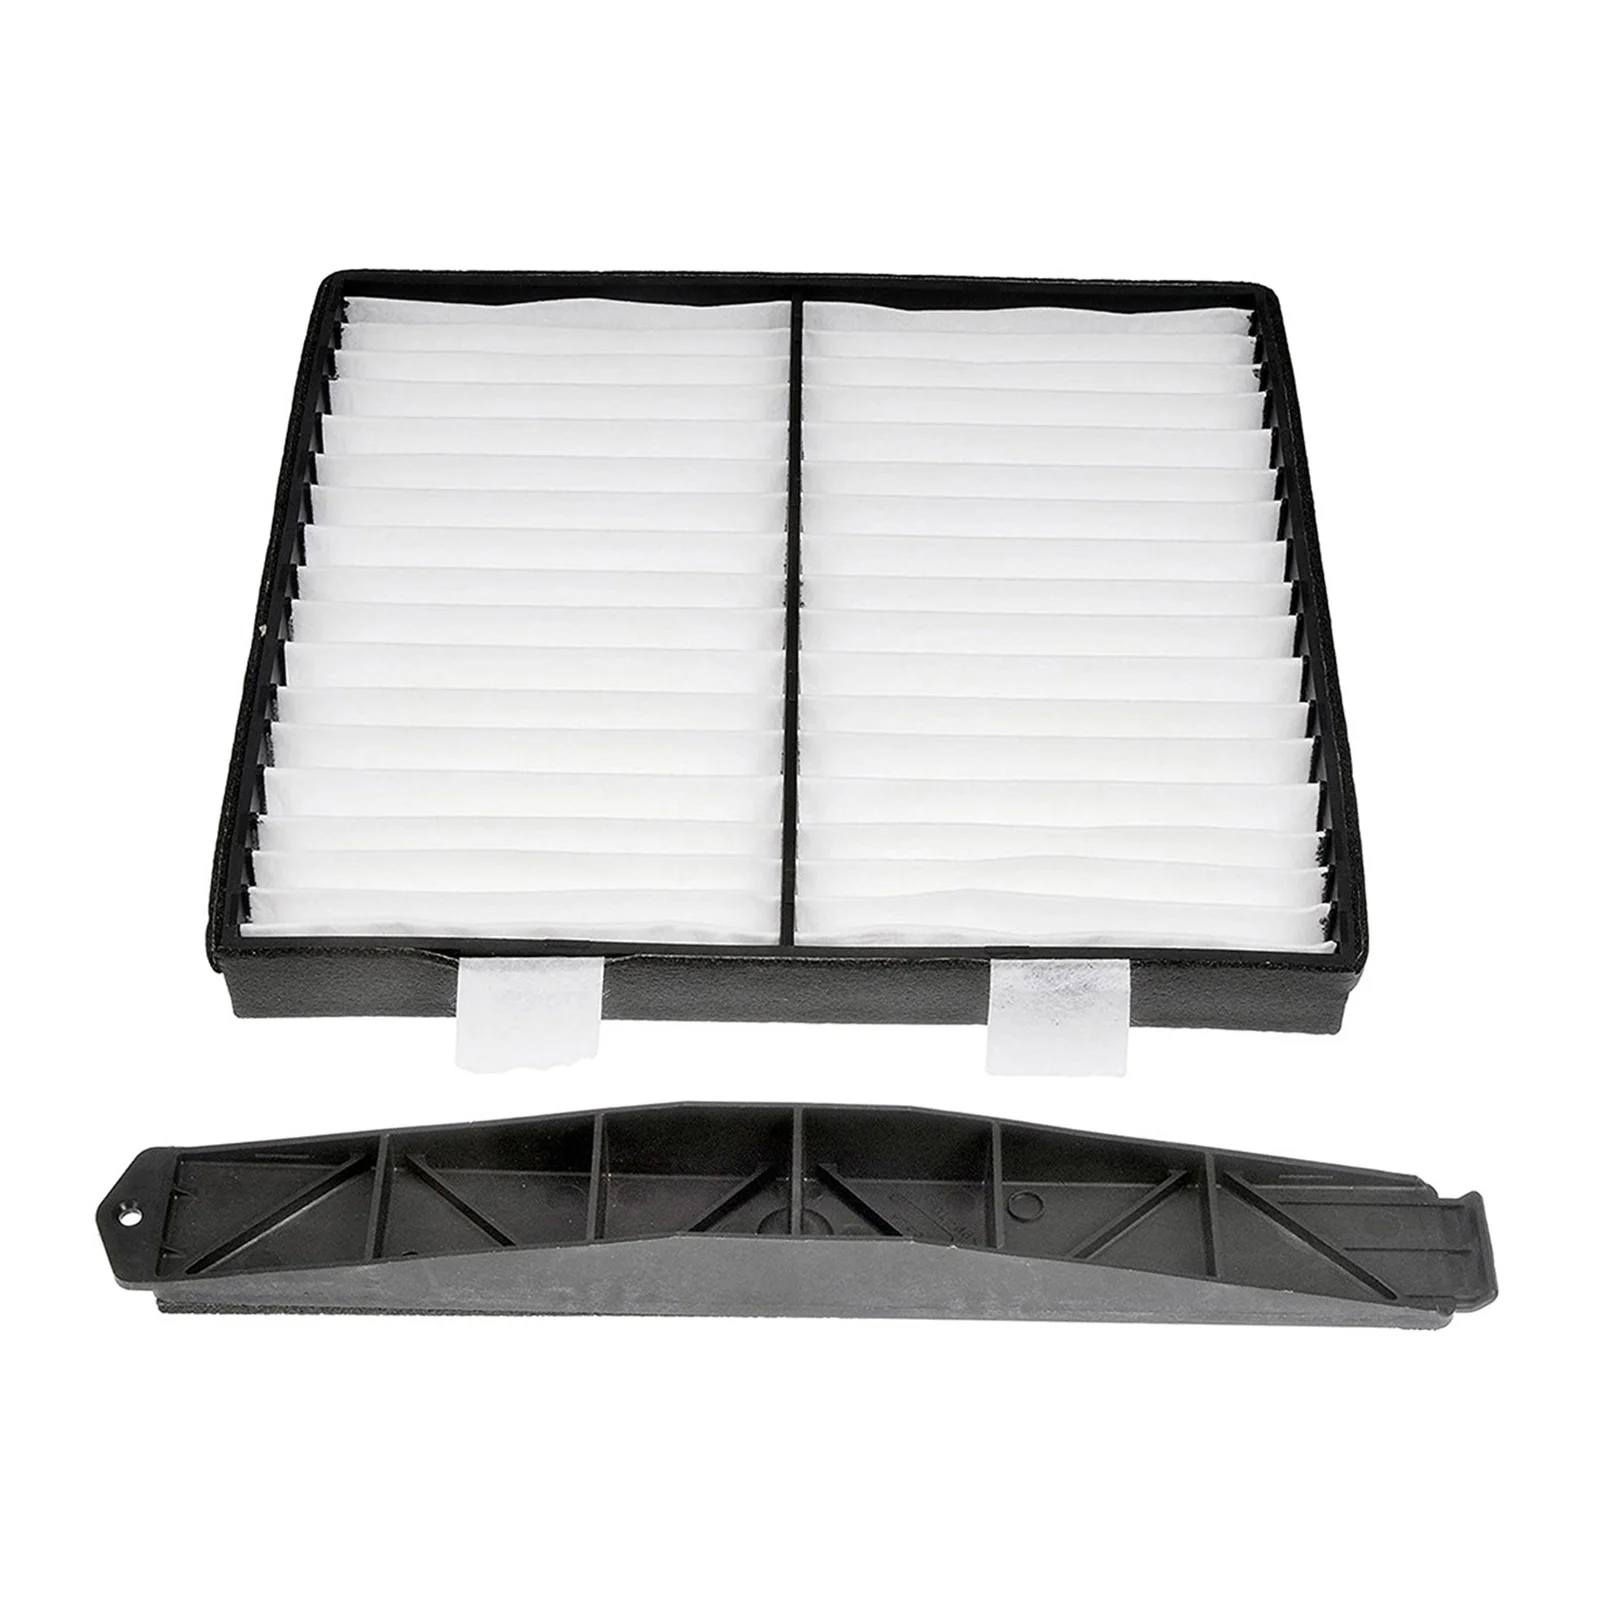 Cabin Air Filter Kit Retrofit Kits For GMC 2007-2014 Replaces OE 22759208